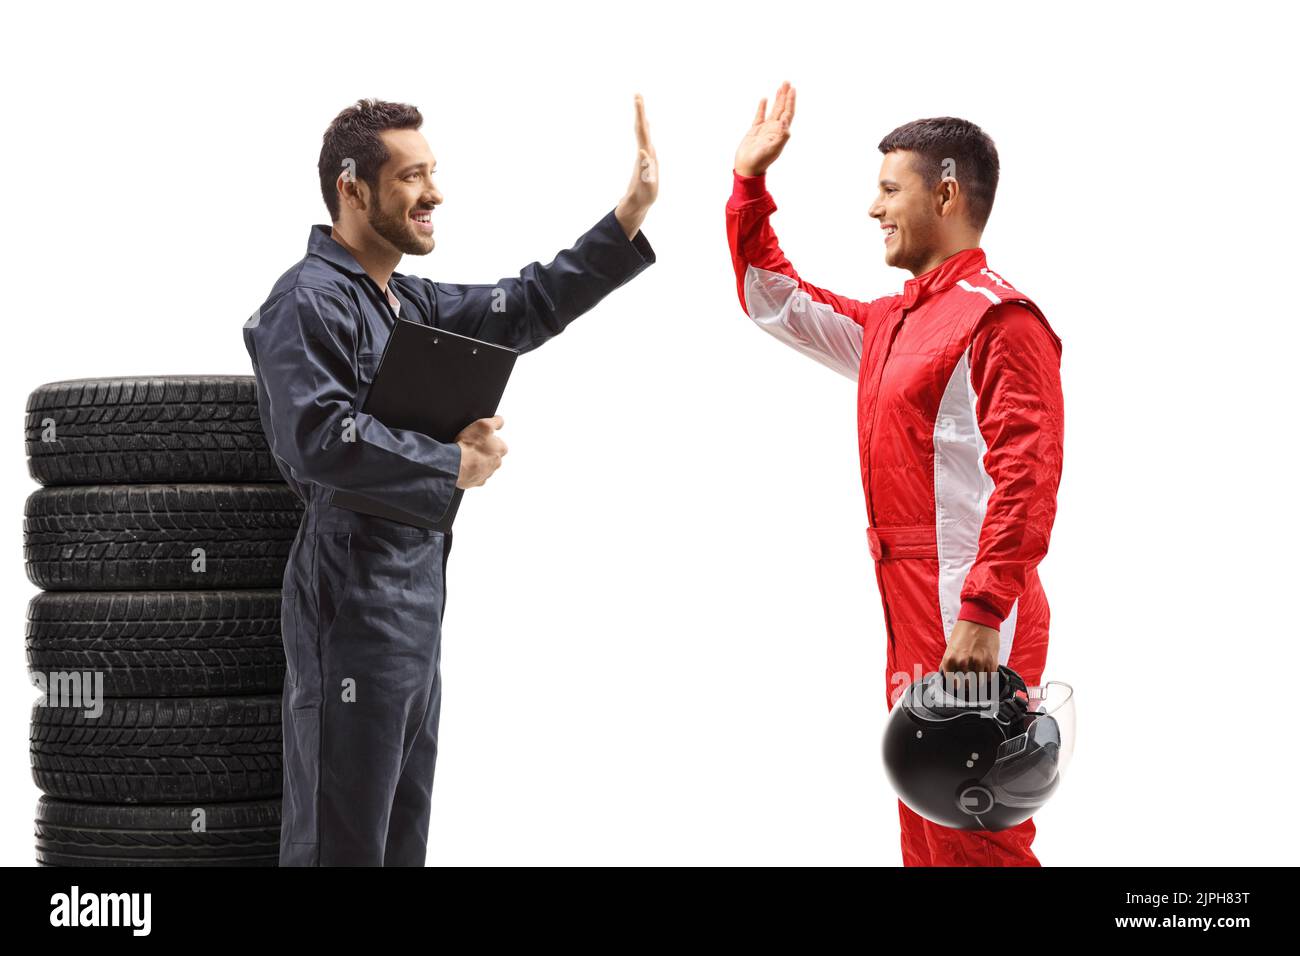 Auto mechanic standing next to a pile of tires and gesturing high five with a racer isolated on white background Stock Photo